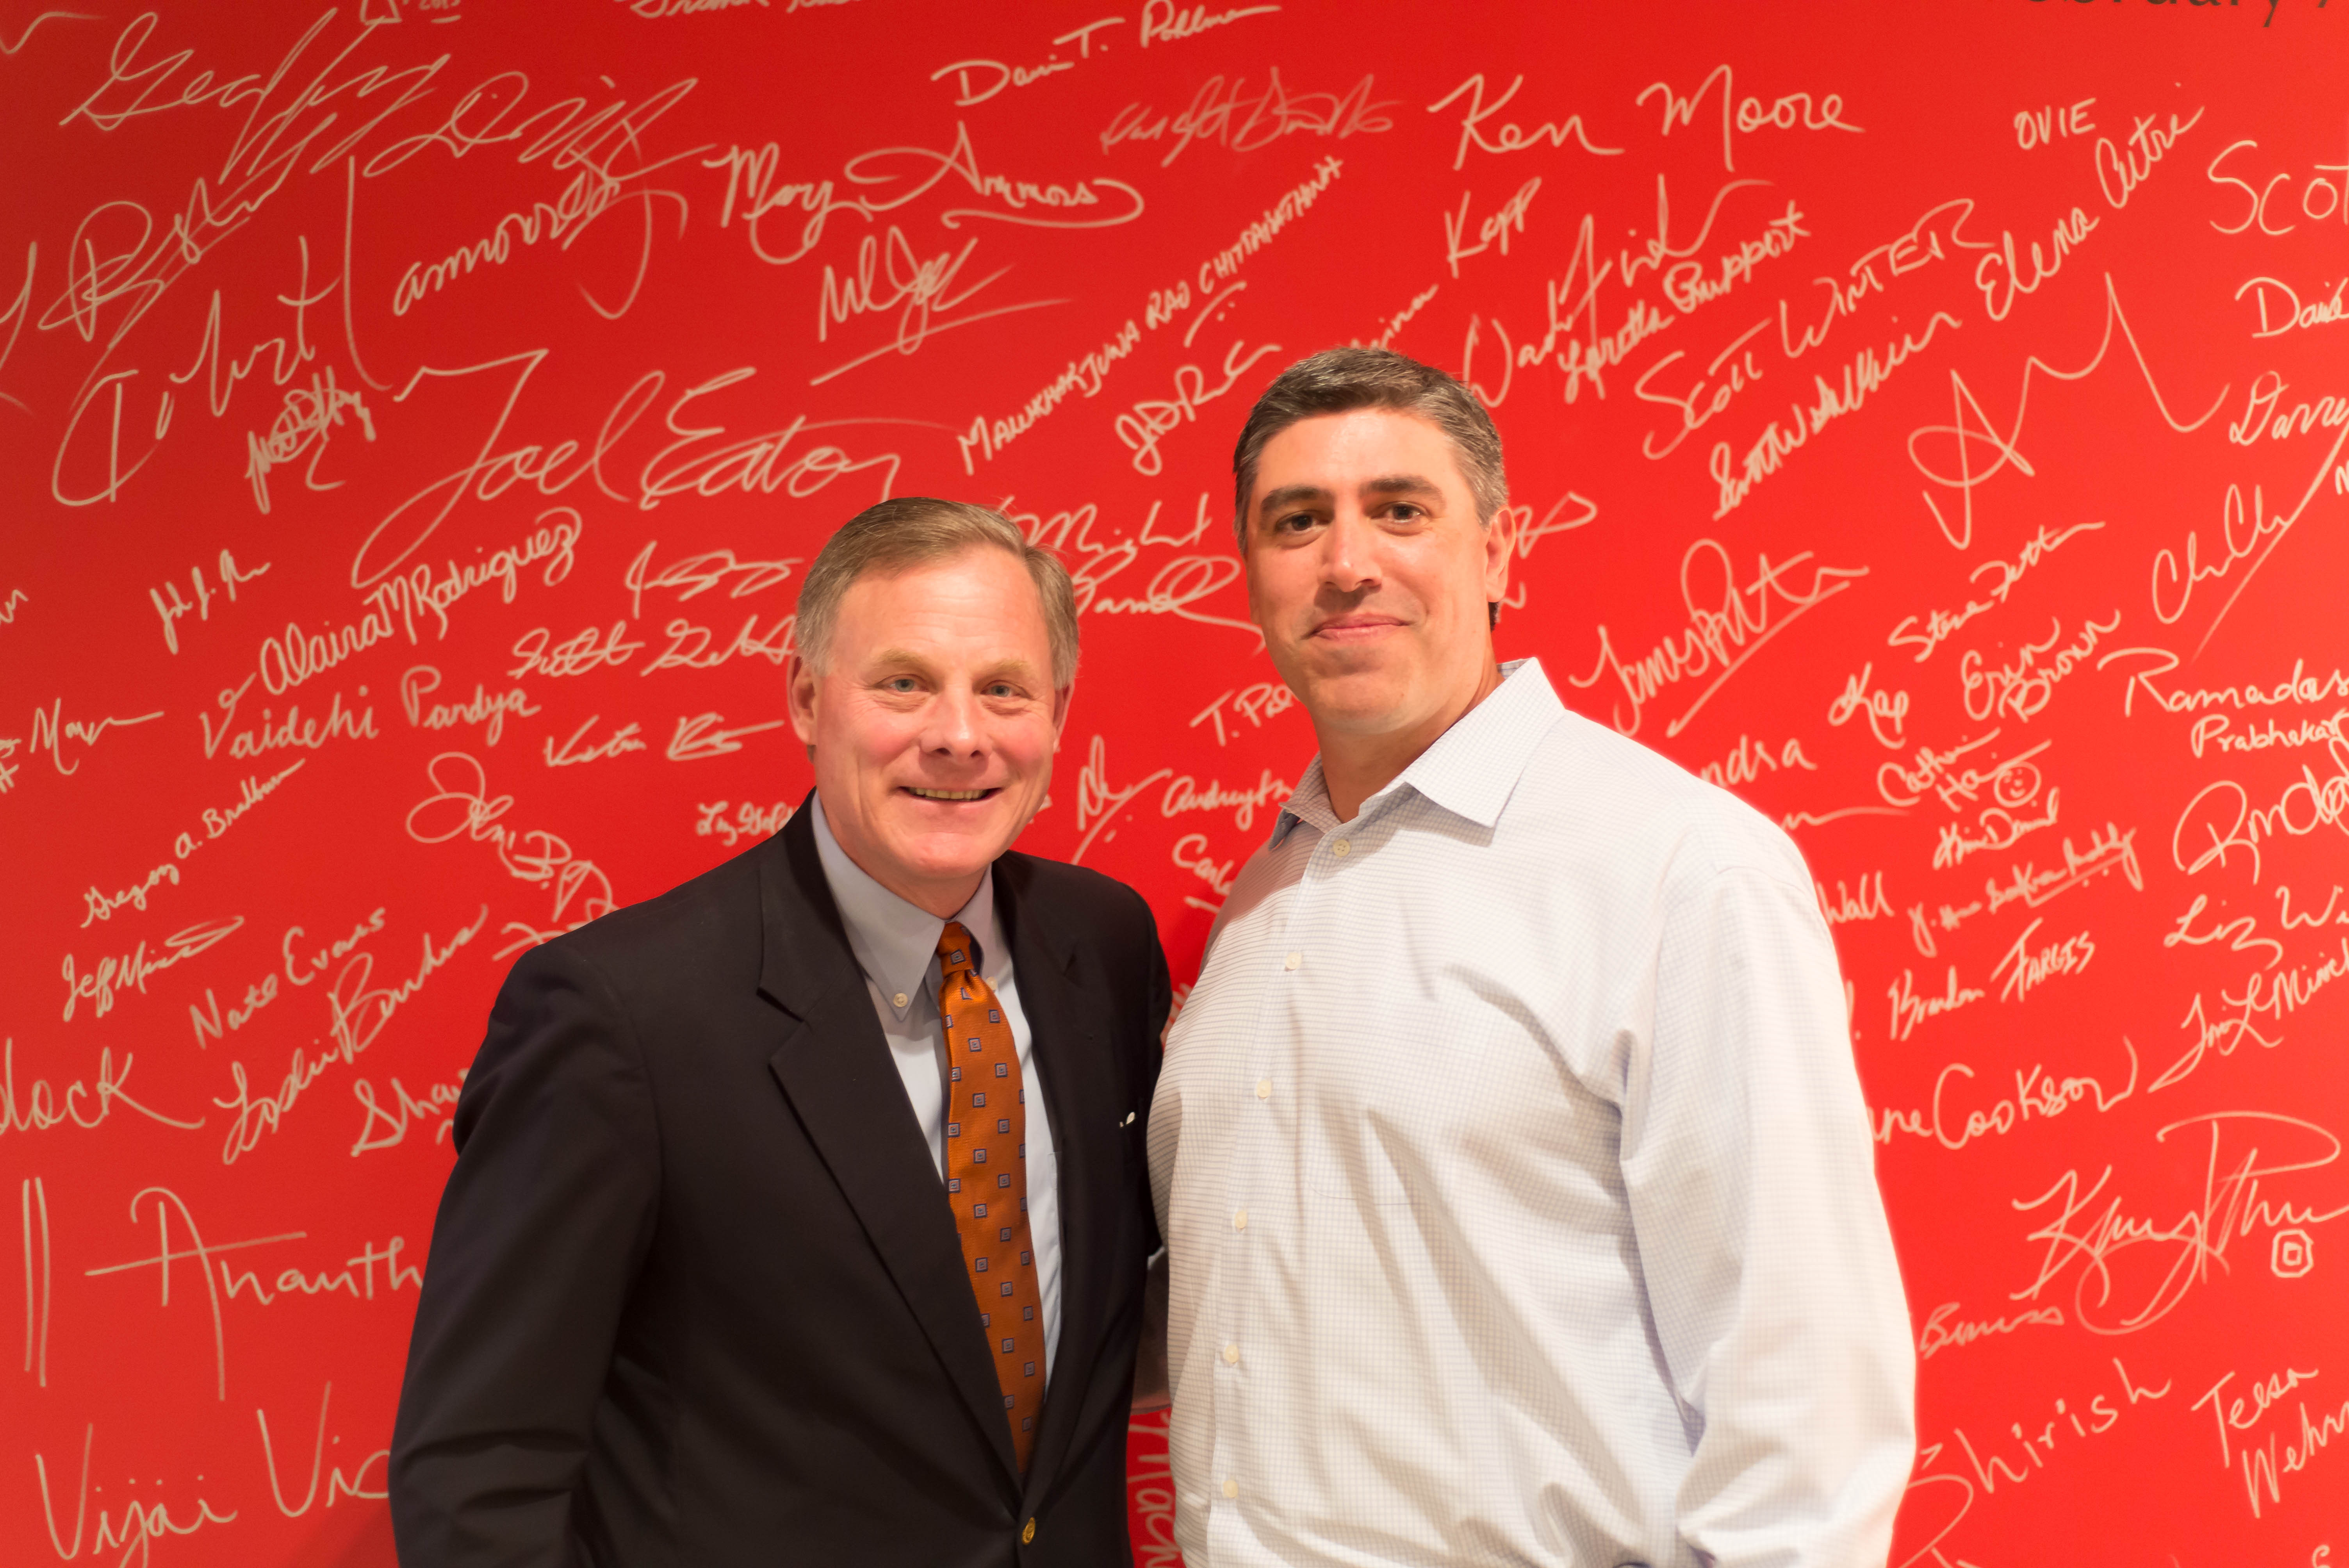 Mike Lipps poses with Sen. Richard Burr in front of the "People Wall" at the LexisNexis software business headquarters.